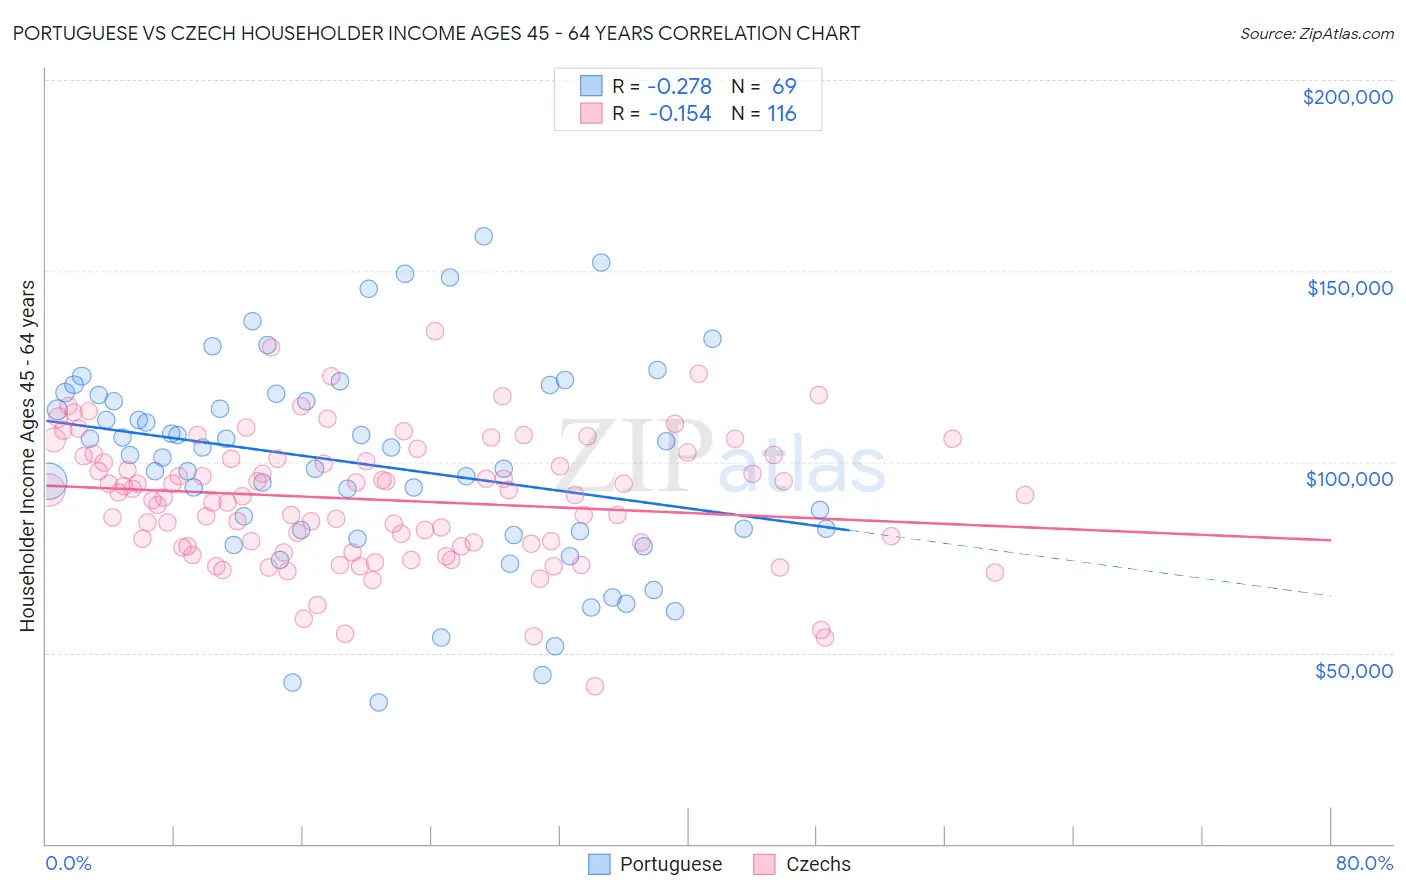 Portuguese vs Czech Householder Income Ages 45 - 64 years